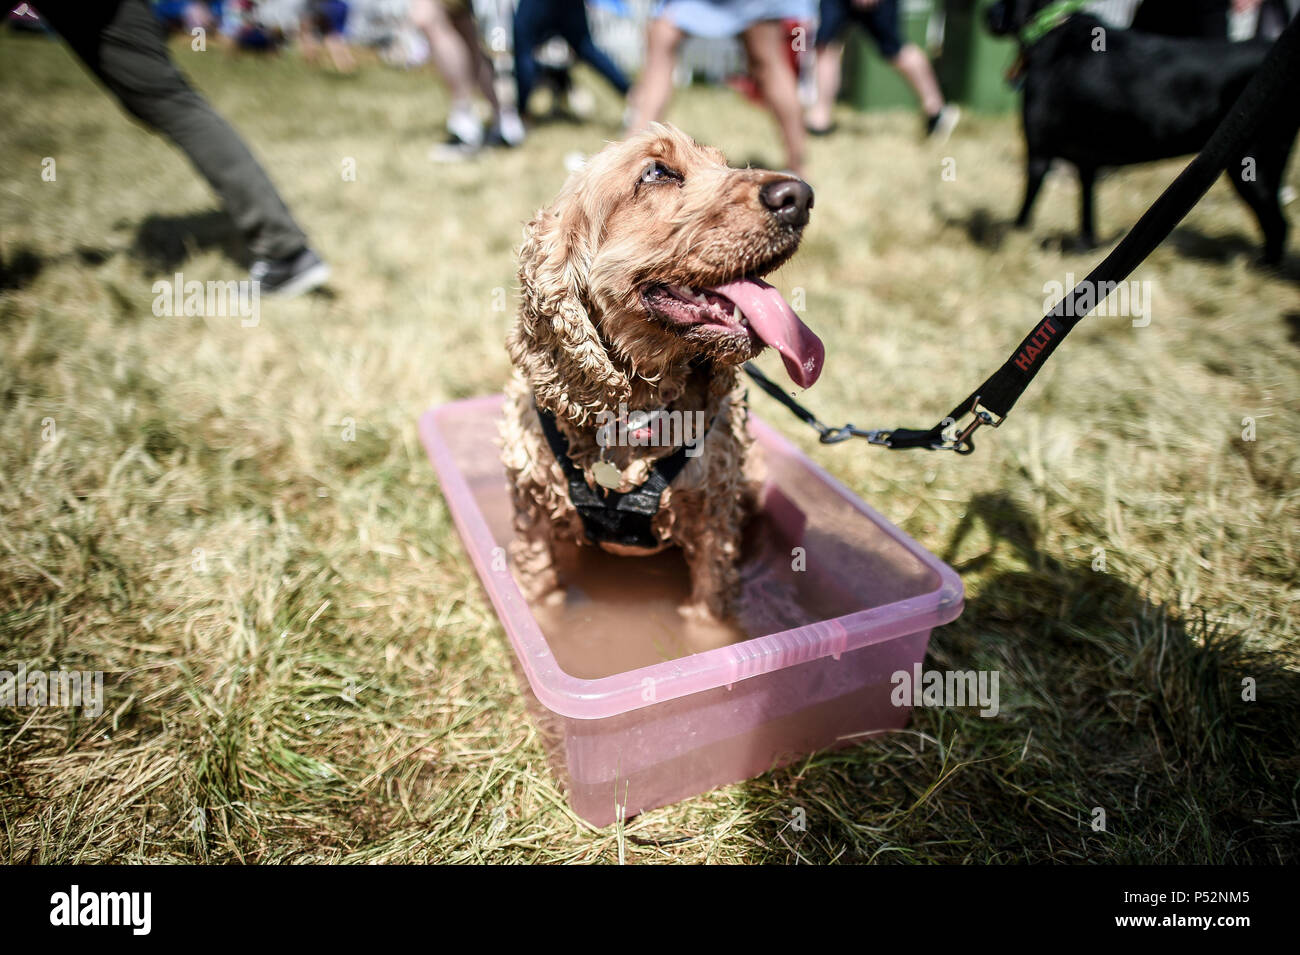 A dog takes an impromptu bath in a large drinking bowl at Dogfest at Ashton Court, Bristol, where thousands of dogs and their owners come together to celebrate all things canine. Stock Photo